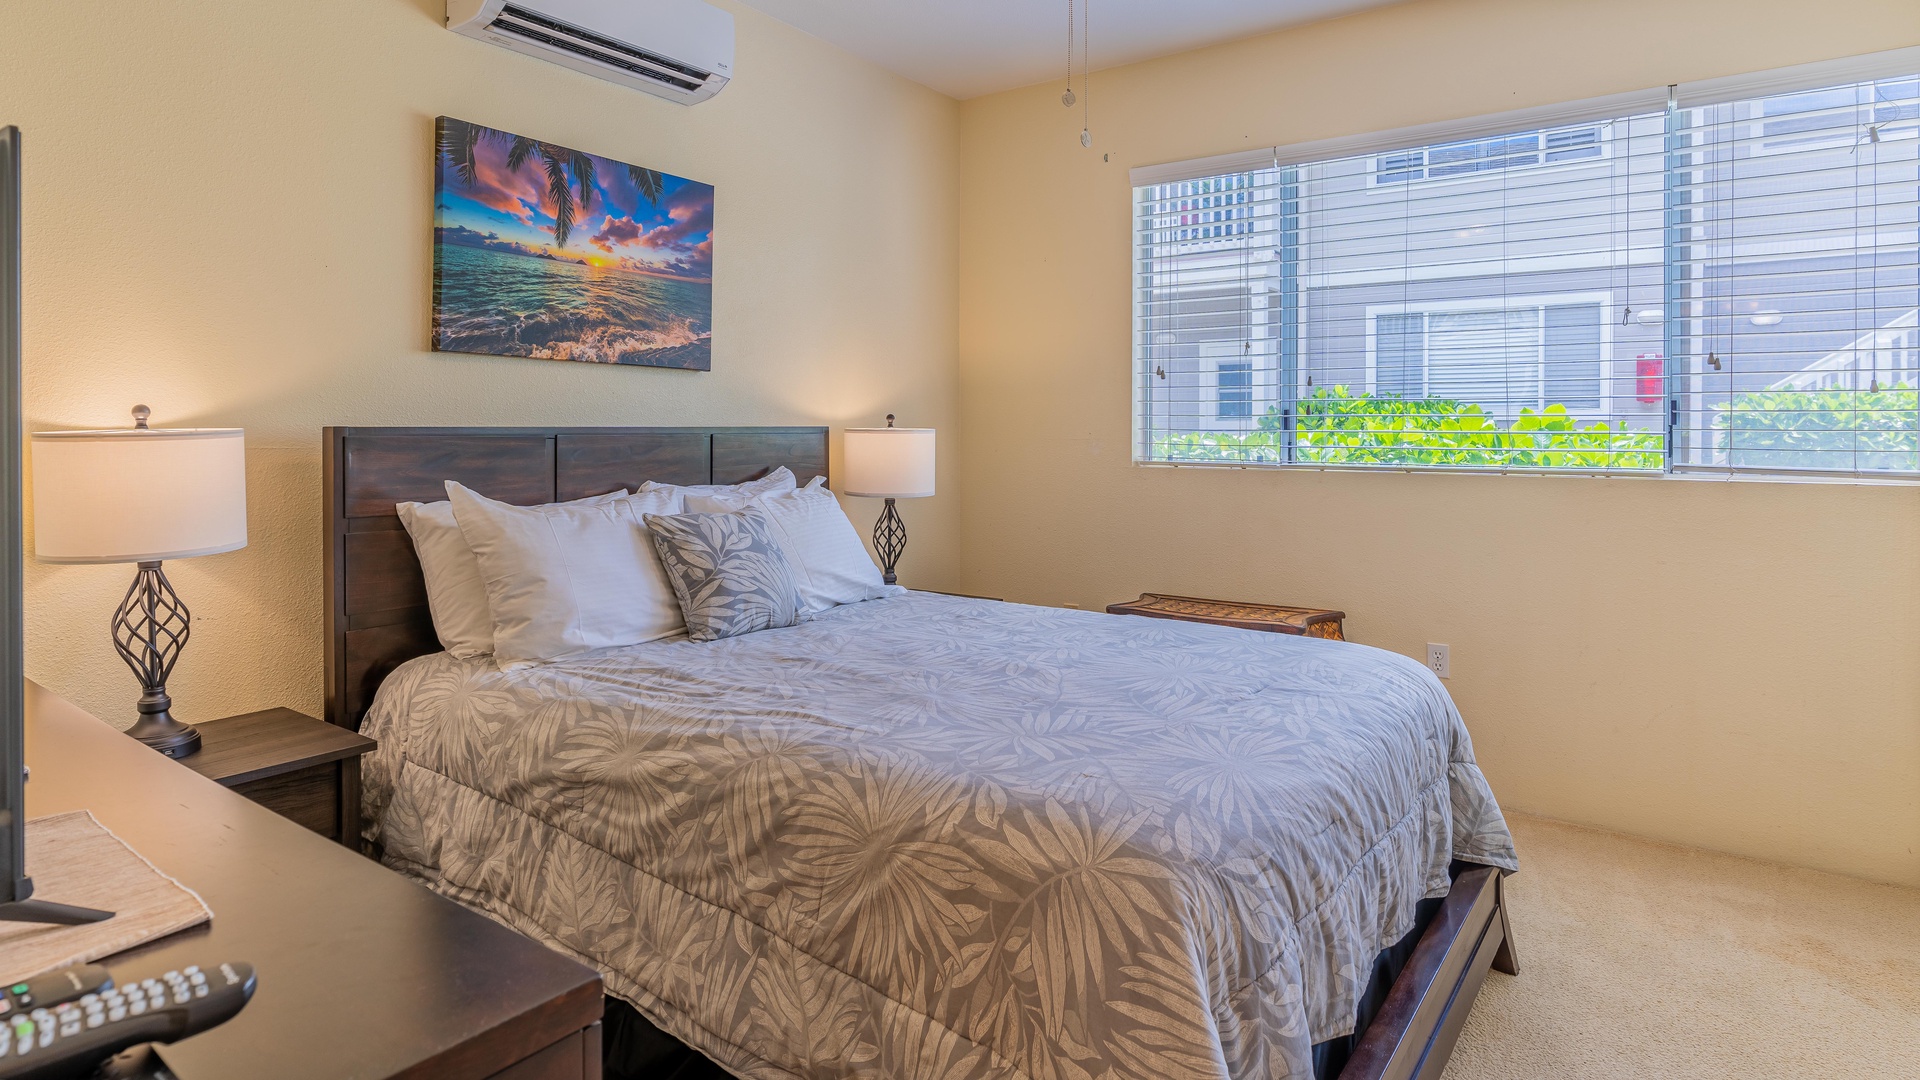 Kapolei Vacation Rentals, Fairways at Ko Olina 18C - The primary guest bedroom has a TV, space to unwind and a large closet.